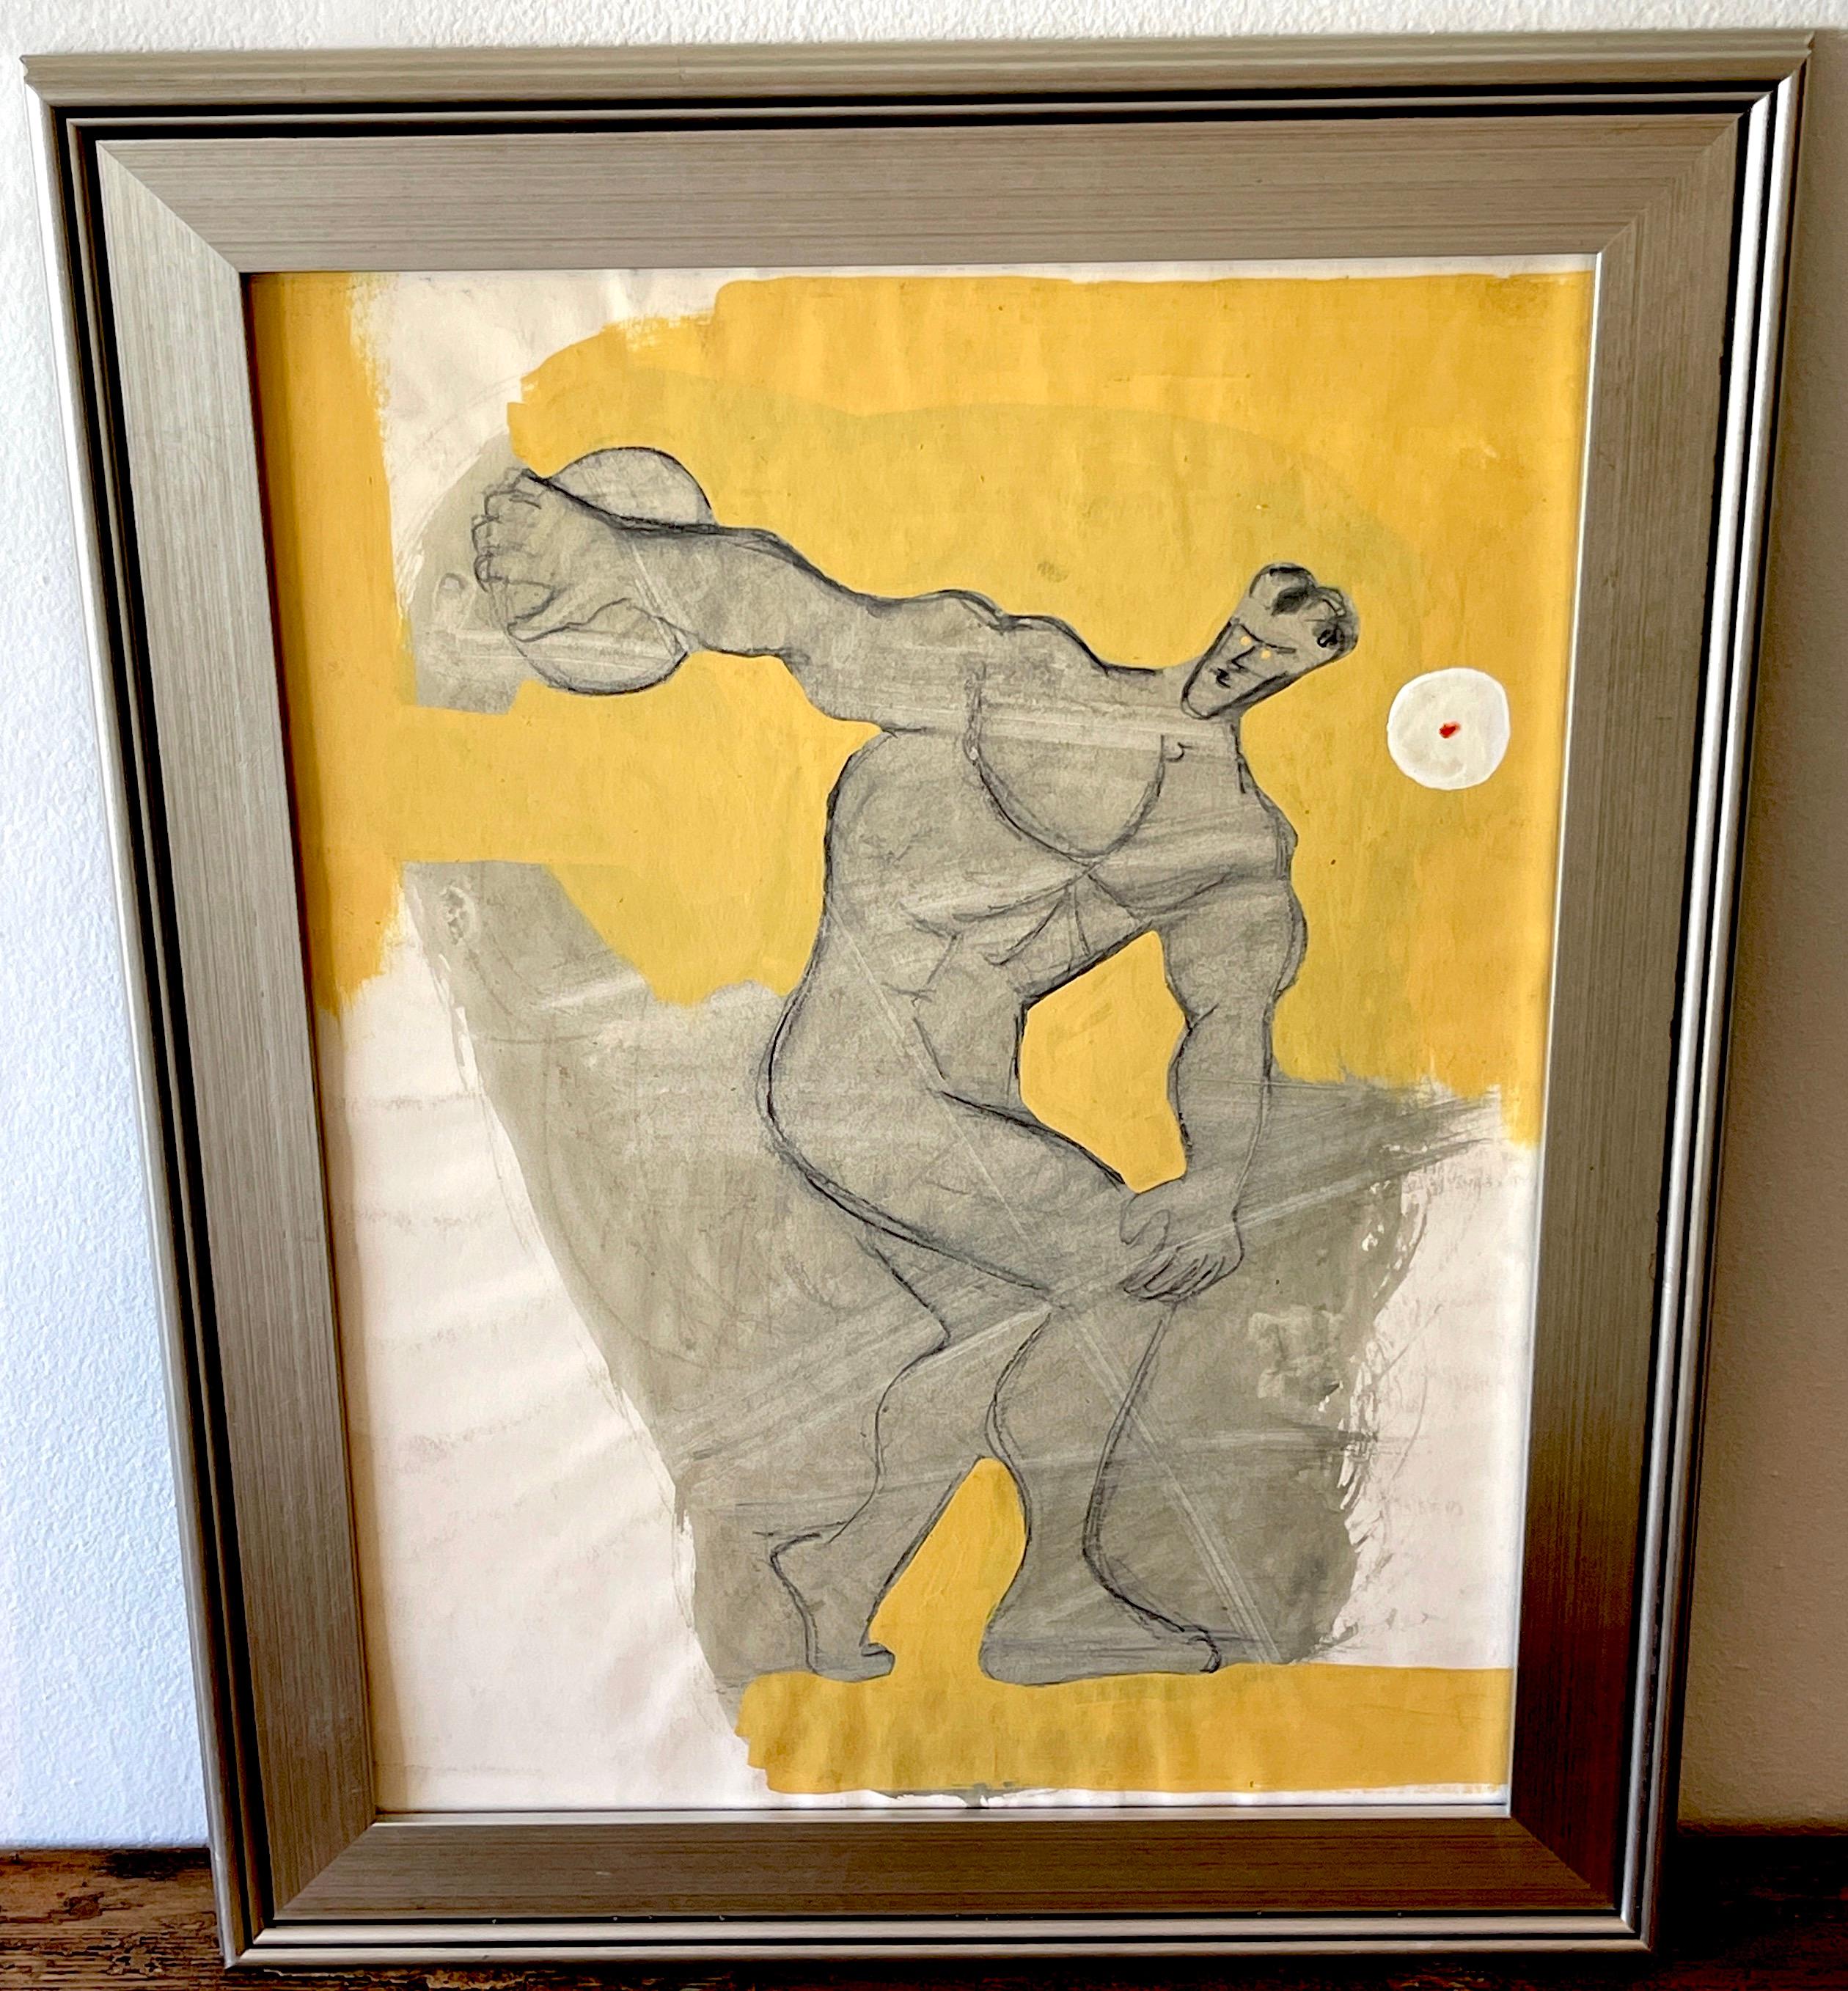 Glass 'The Discobolus' Oil/Mixed Media on Paper, 1960s by Douglas D. Peden For Sale